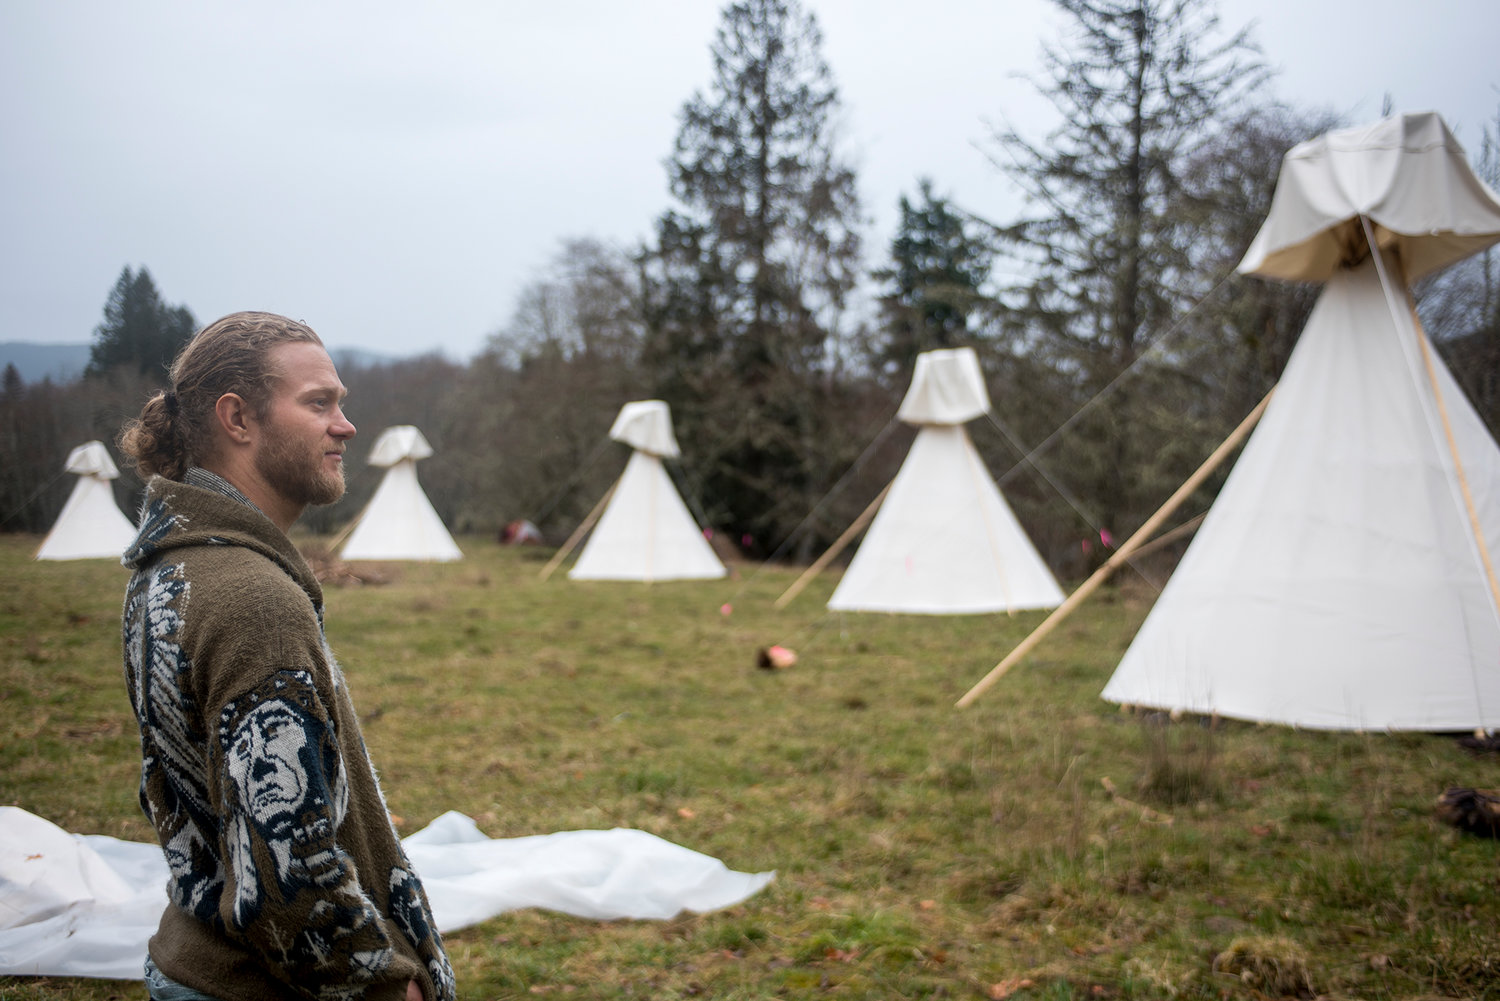 Marc Shackman, shaman and CEO of the Oklevueha Native American Church of Ayahuasca Healings, stands near a group of teepees where church goers stay during the three-day religious ceremonies at the church's property near Elbe on Thursday afternoon.